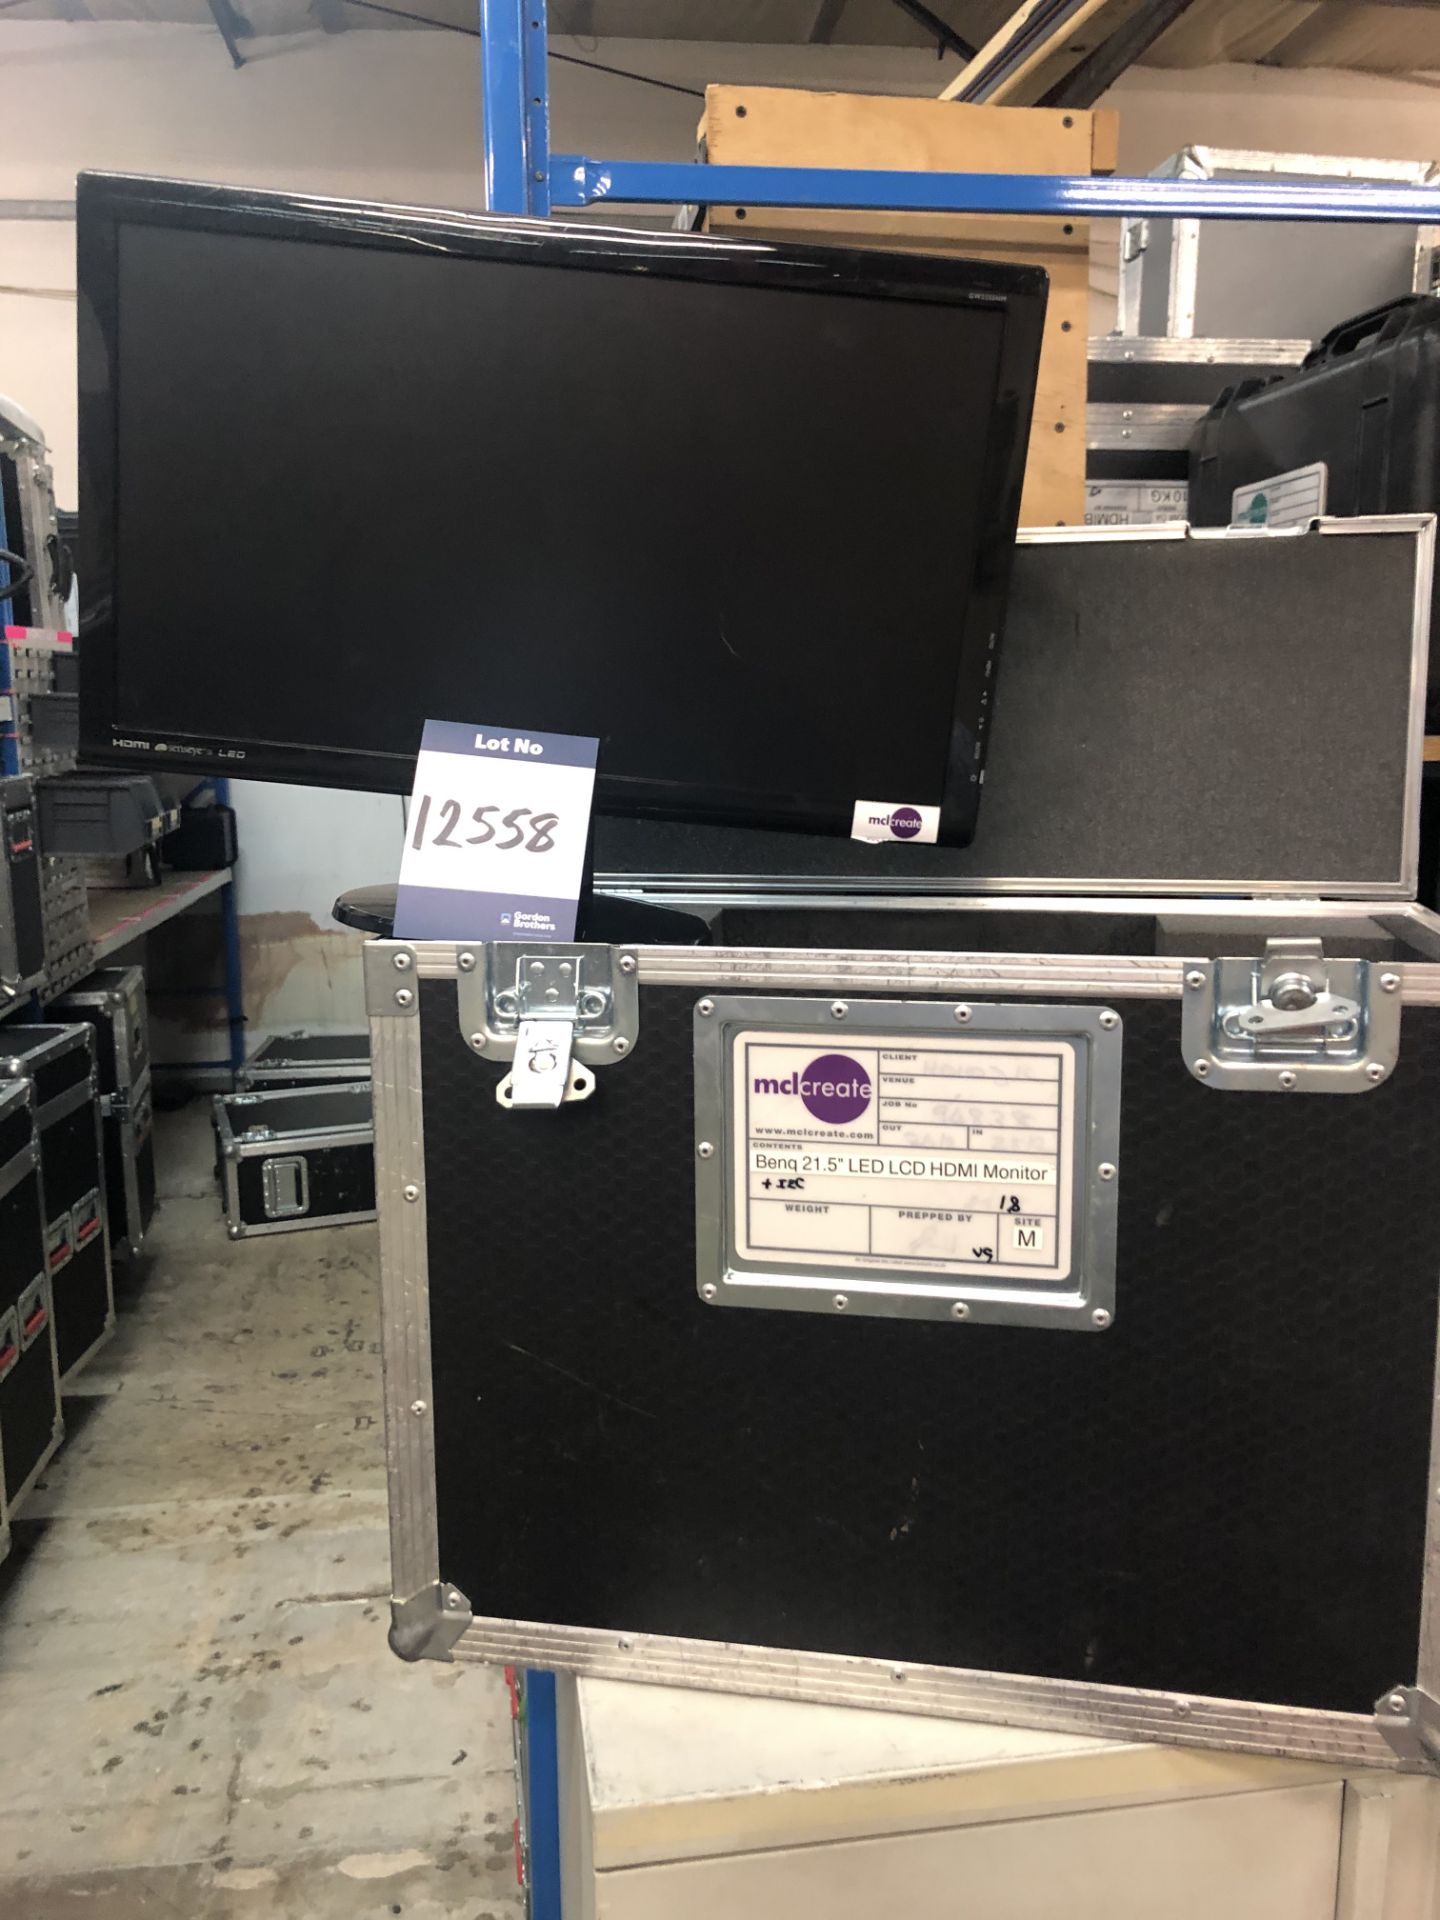 Benq, 24" flat screen monitor with power cable in